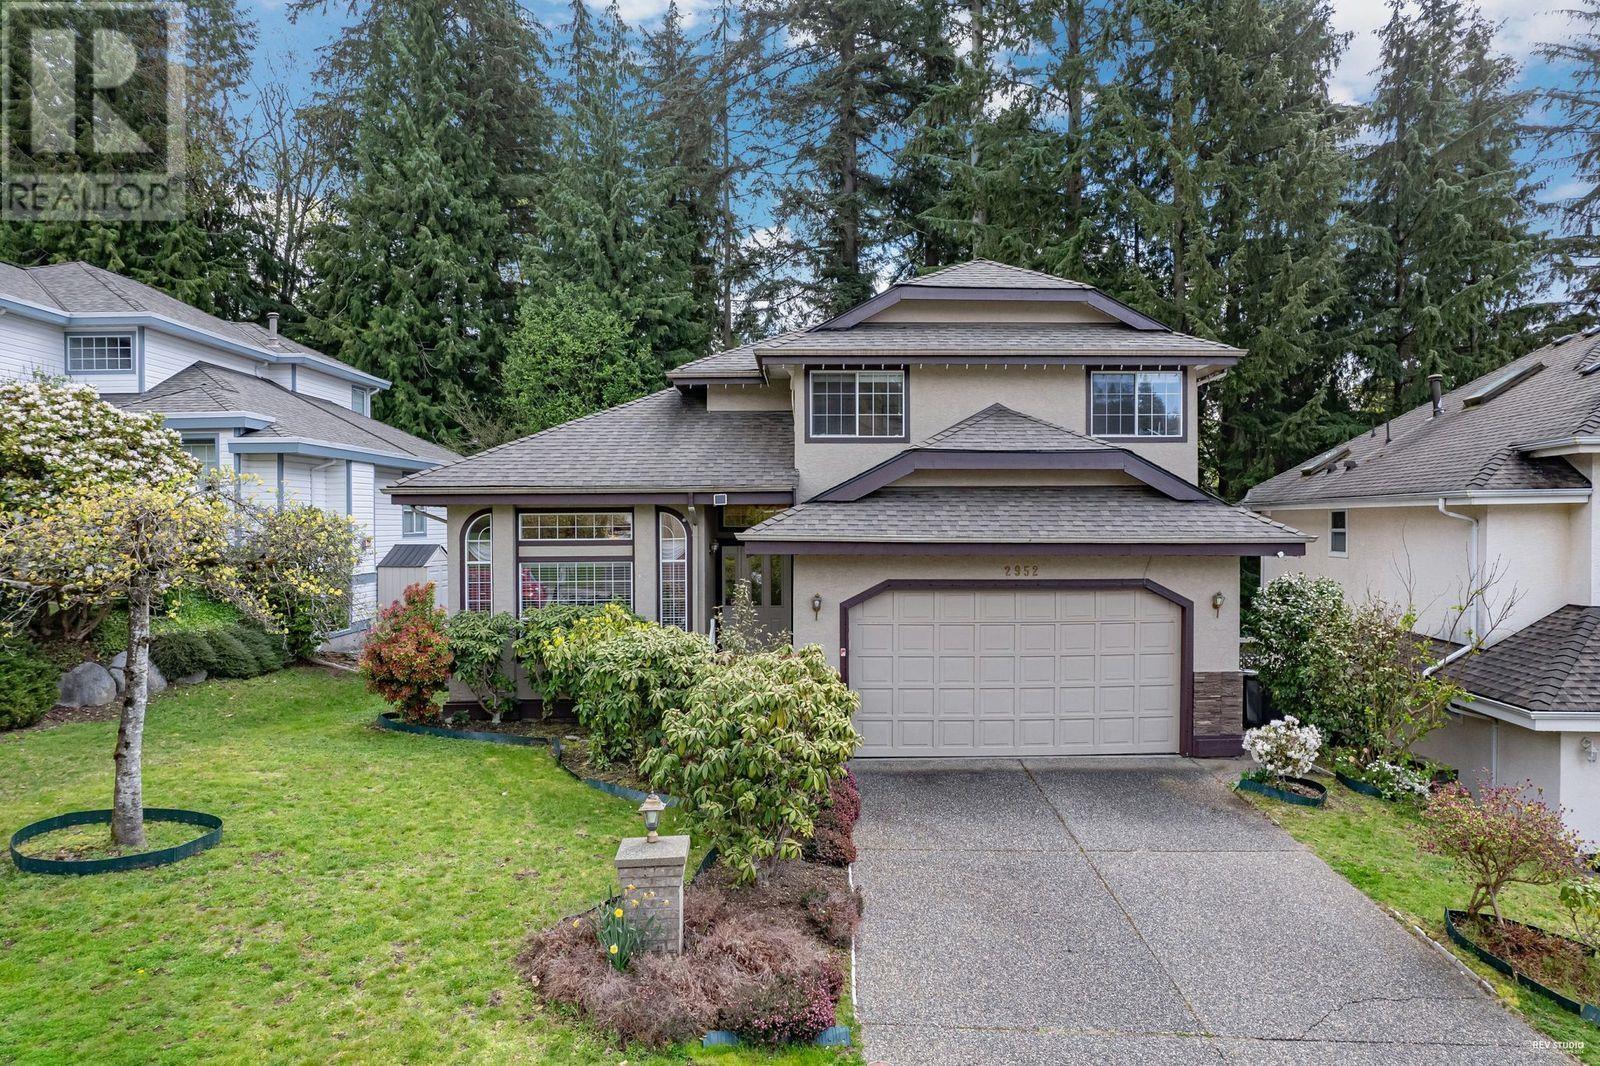 2952 WATERFORD PLACE, coquitlam, British Columbia